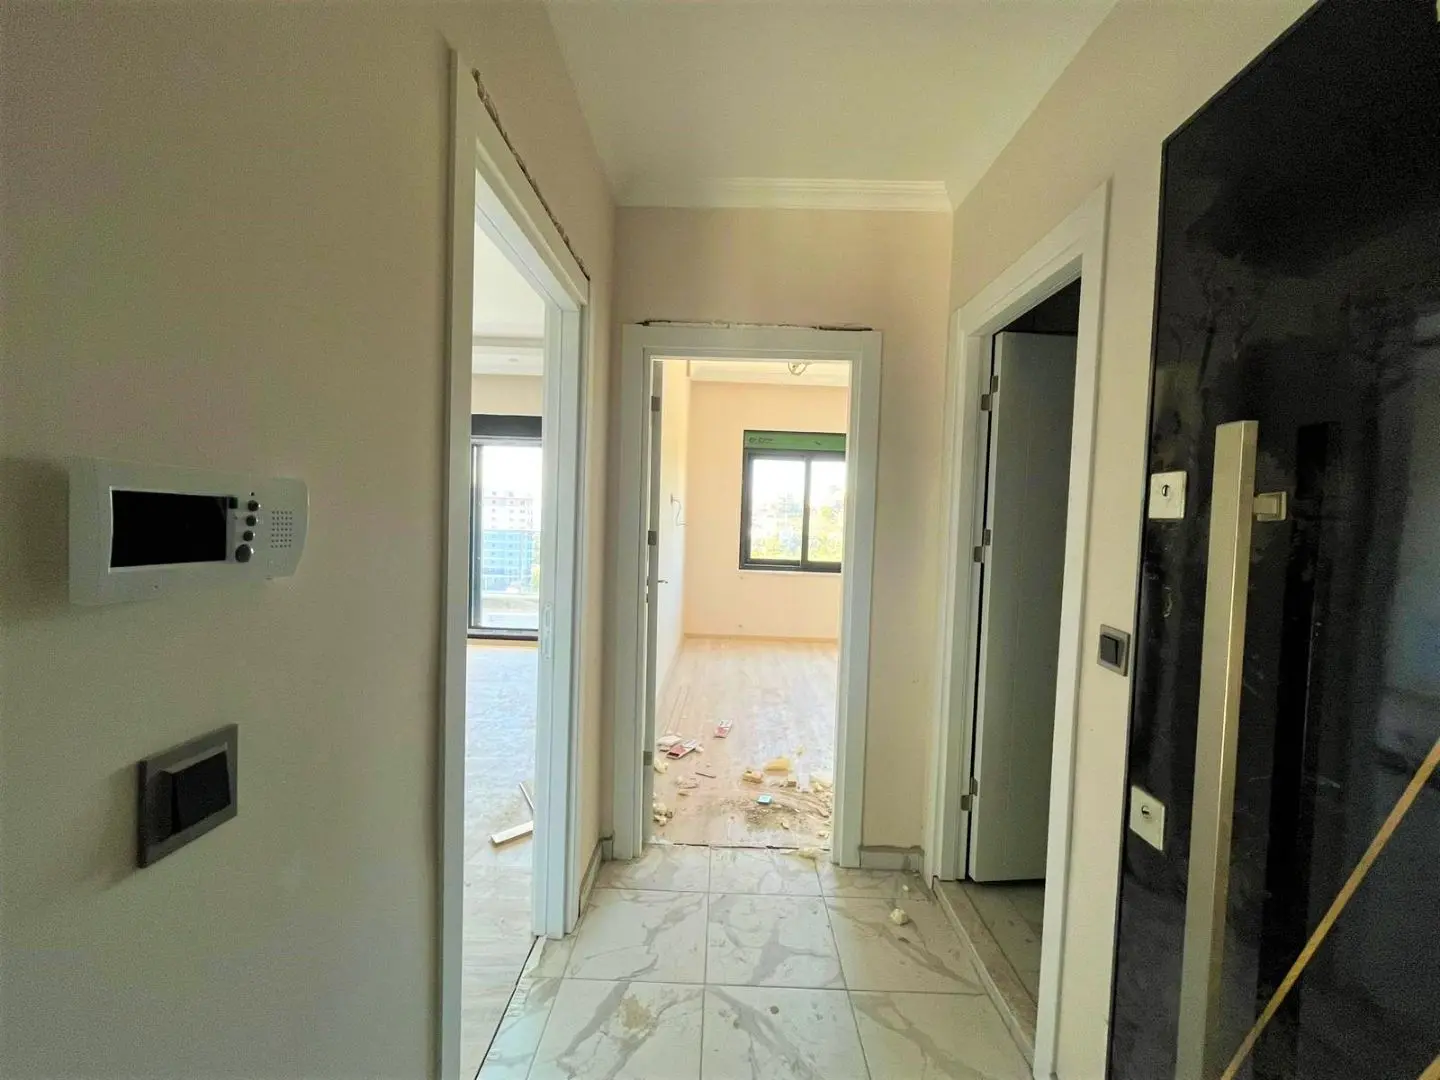 NEW 1+1 FLAT WITH SEA VIEW IN DEMİRTAŞ